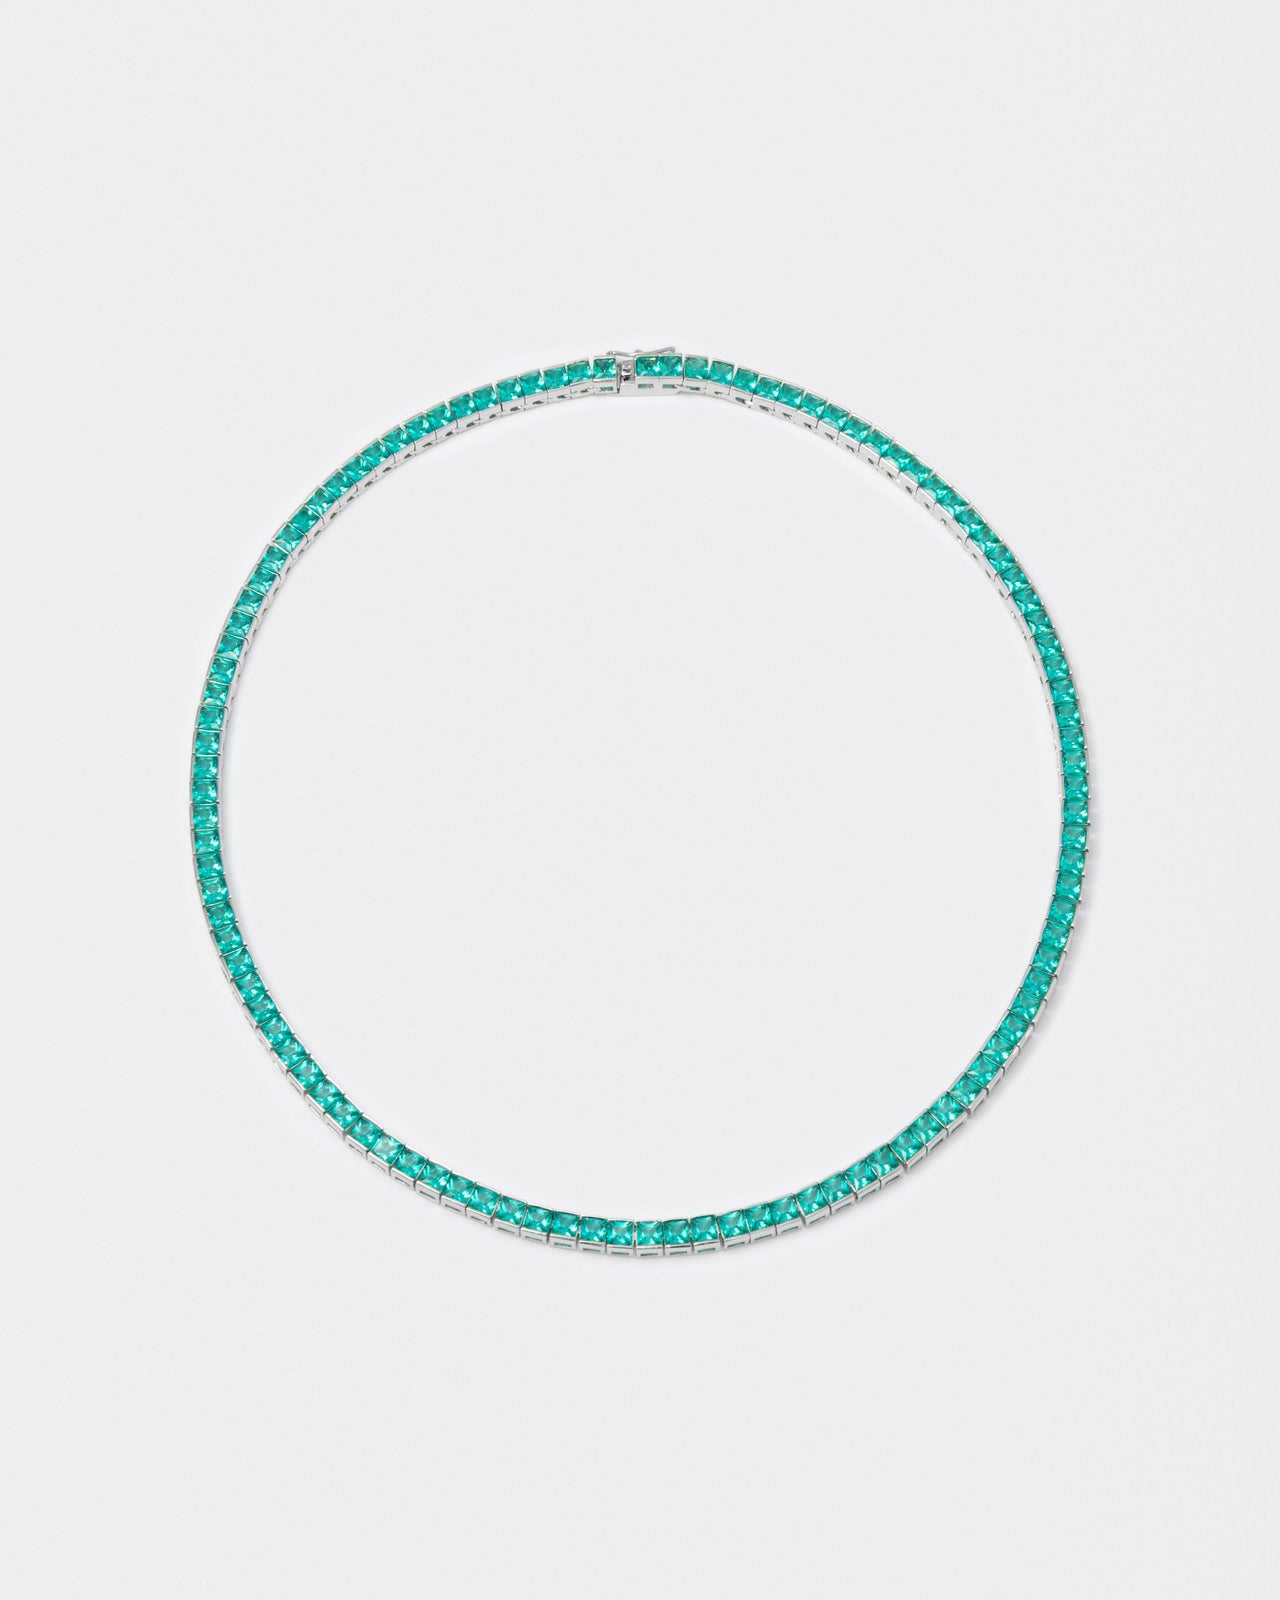 18k white gold coated tennis chain necklace with hand-set princess-cut paraiba stones